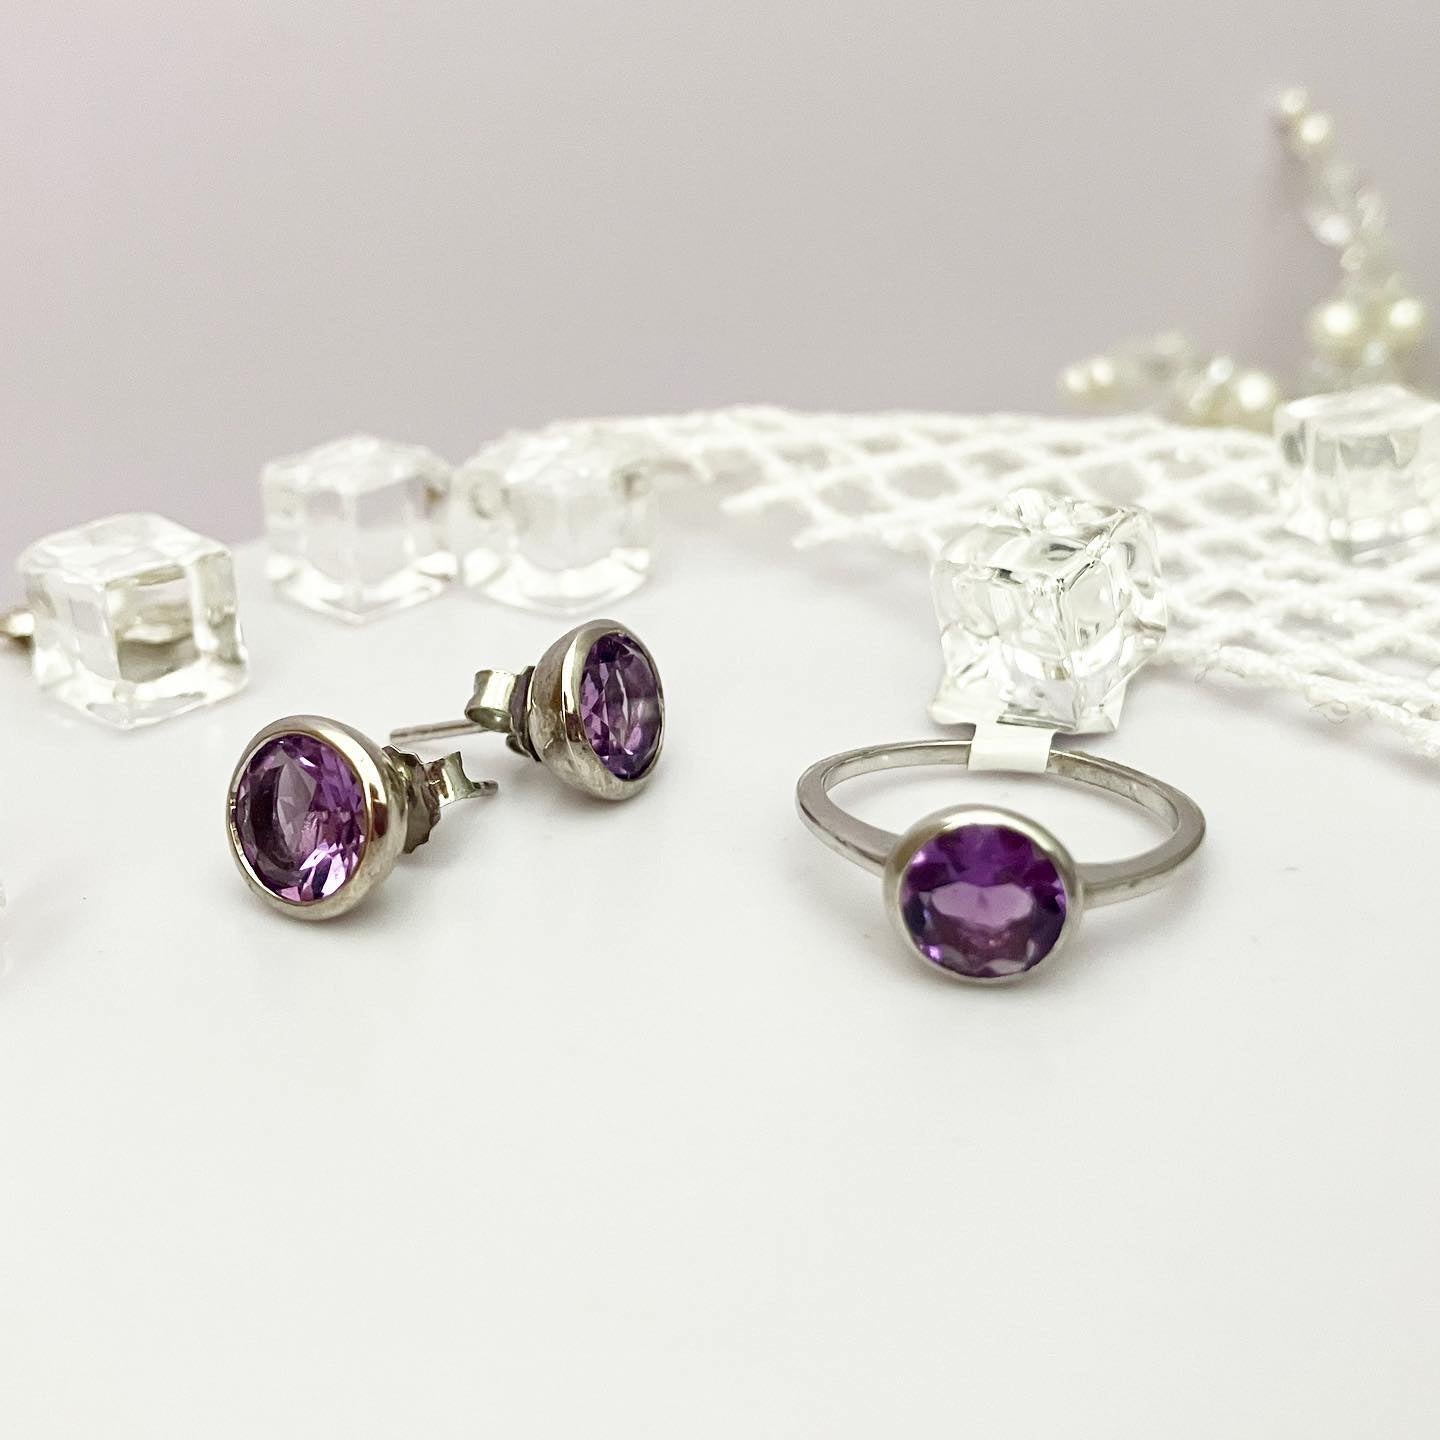 Ring silver 925 samples with amethyst "Fleur"